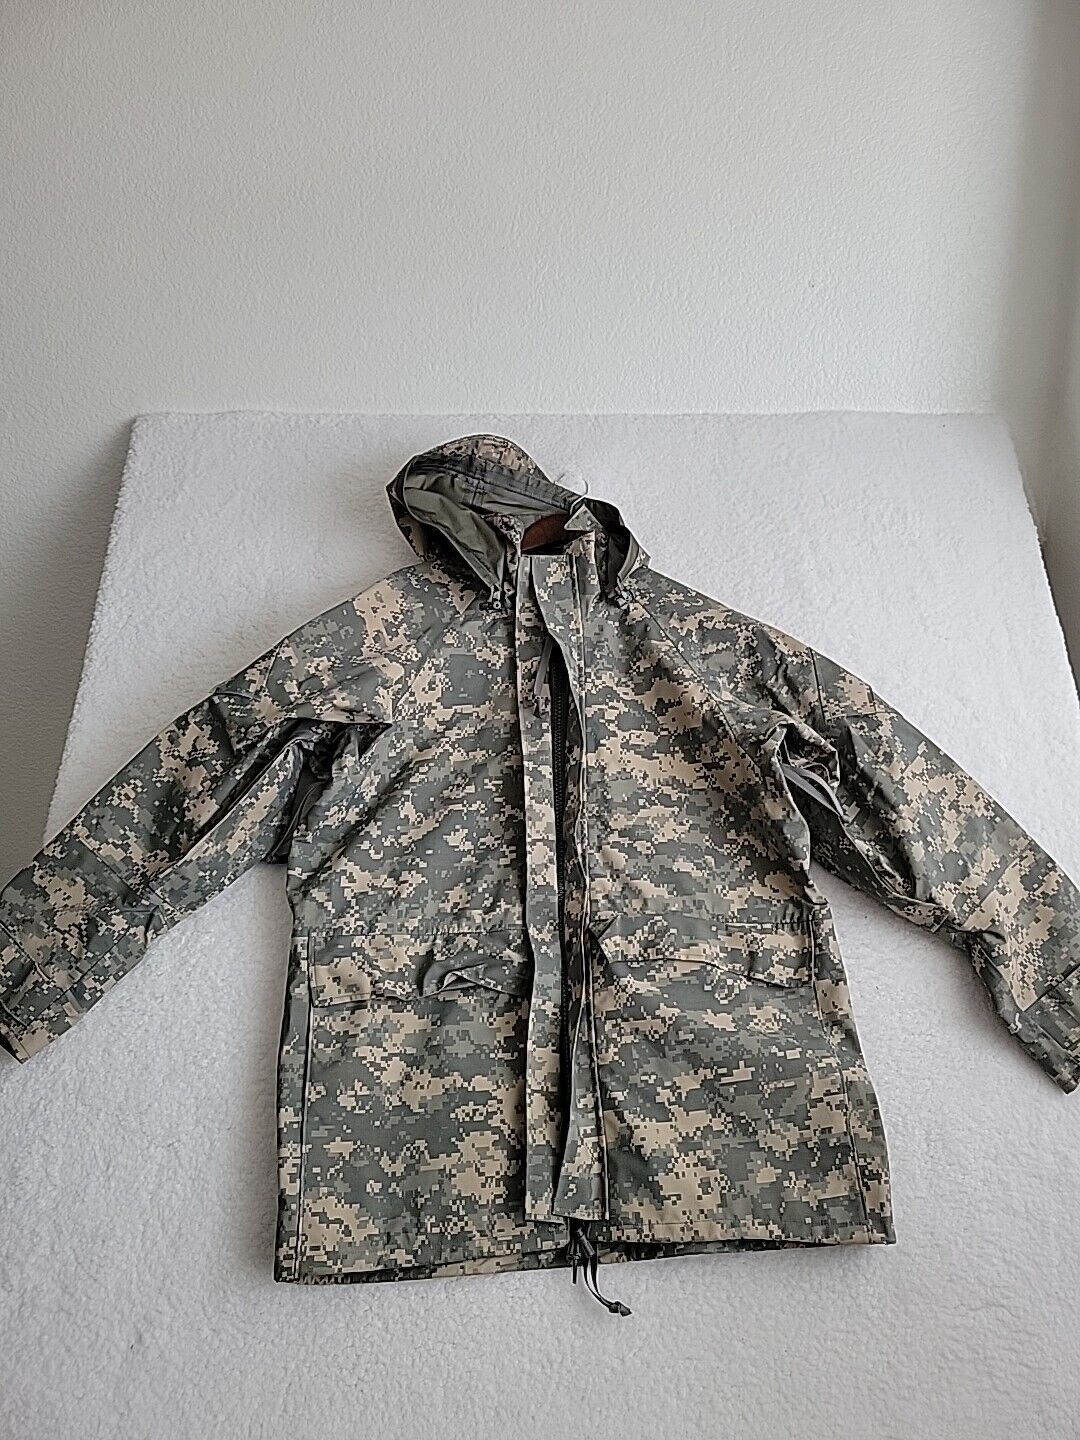 US Army Parka Cold Weather Universal Camouflage GORETEX Jacket M Long